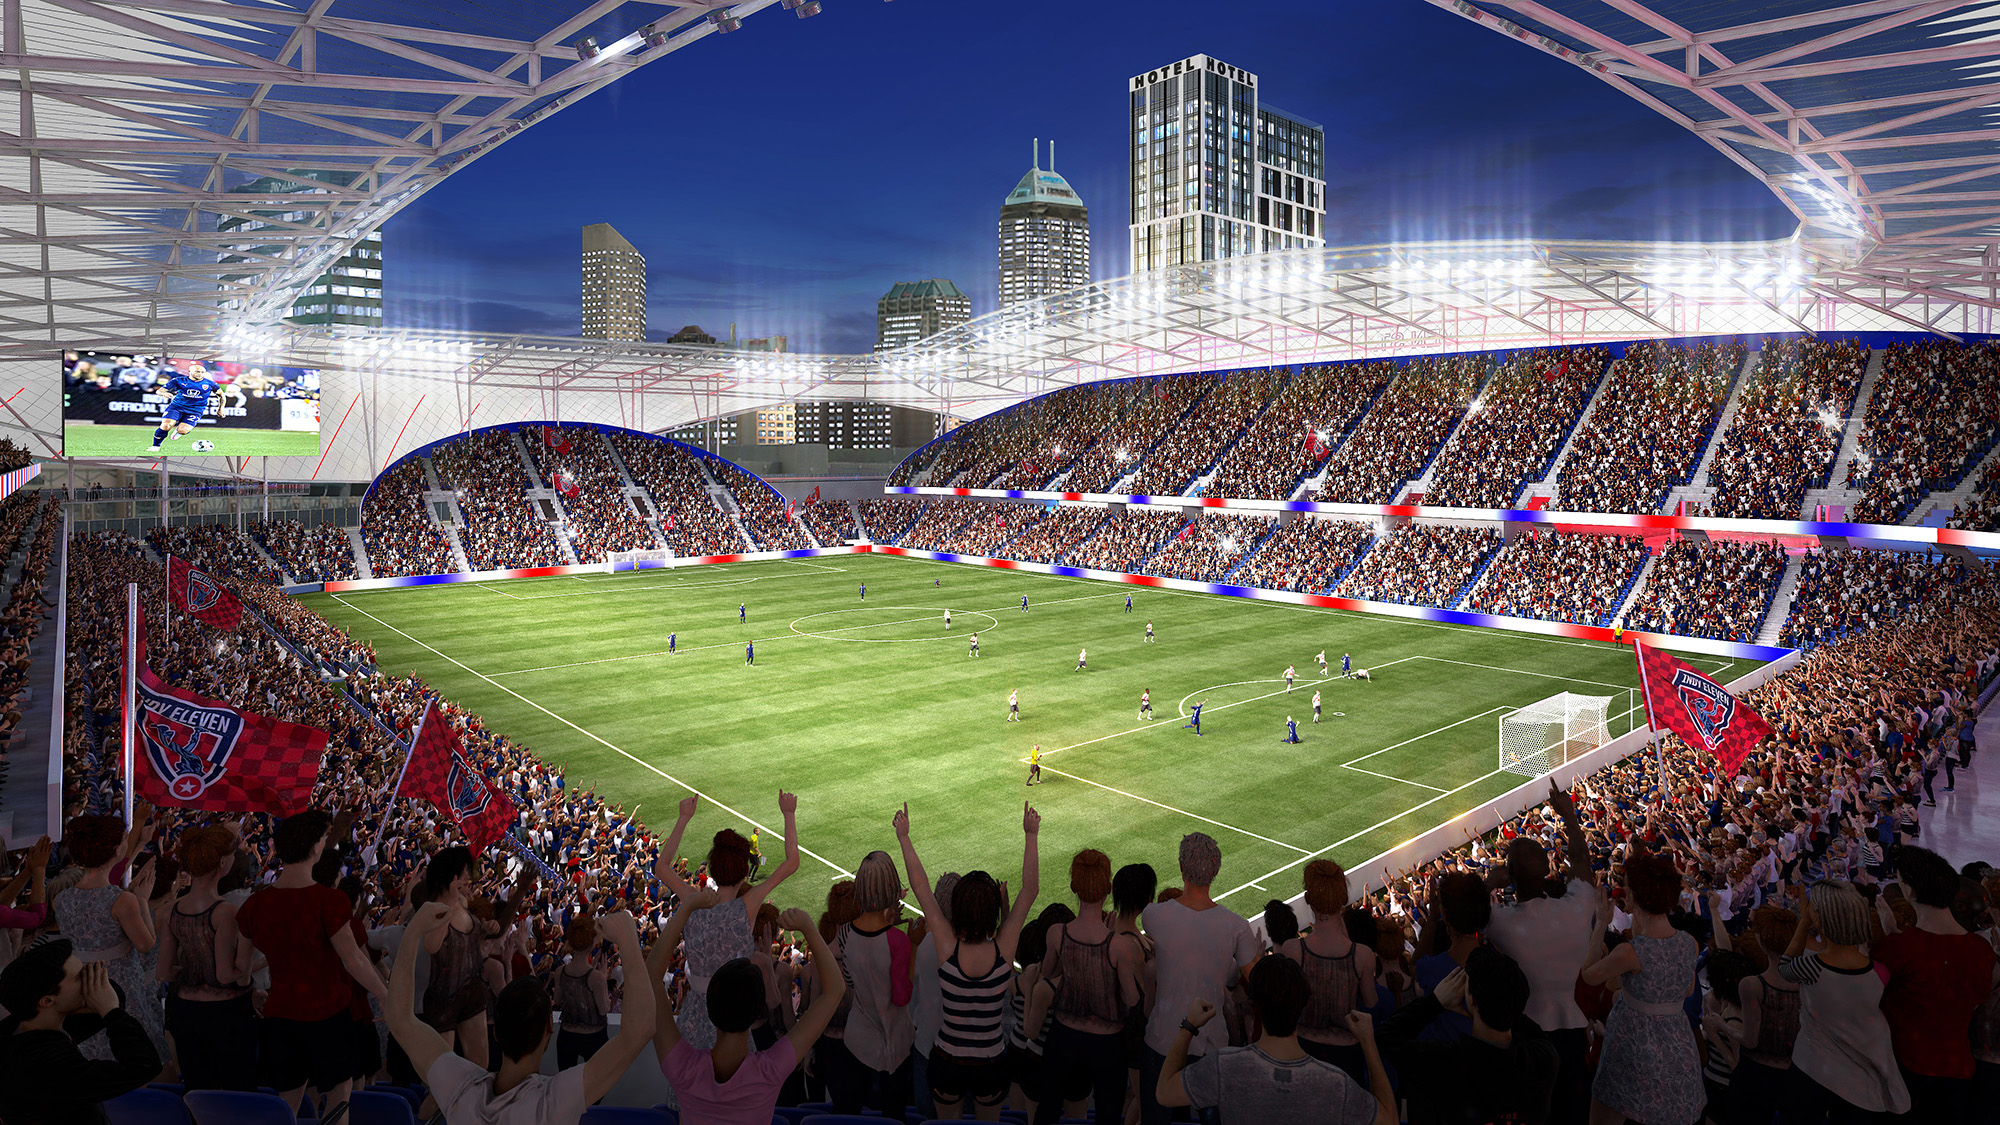 Next up for U.S. World Cup team: Arena ia - Soccer Stadium